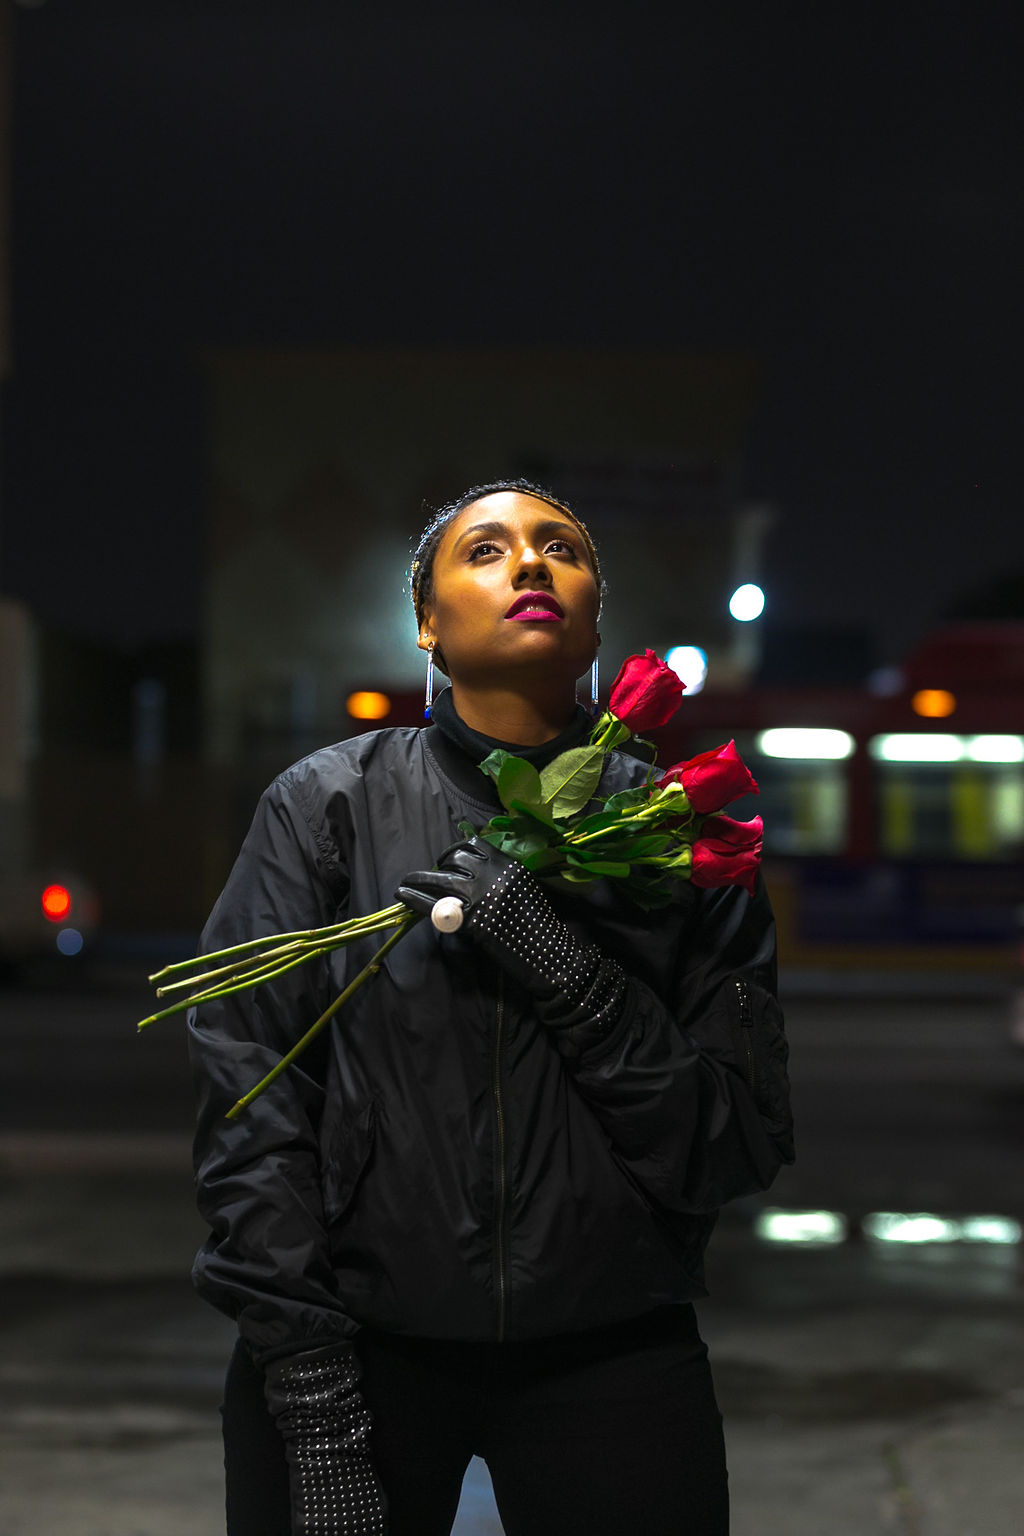 red roses-rsee-xmmtt-wear who you are-lcm-night photography